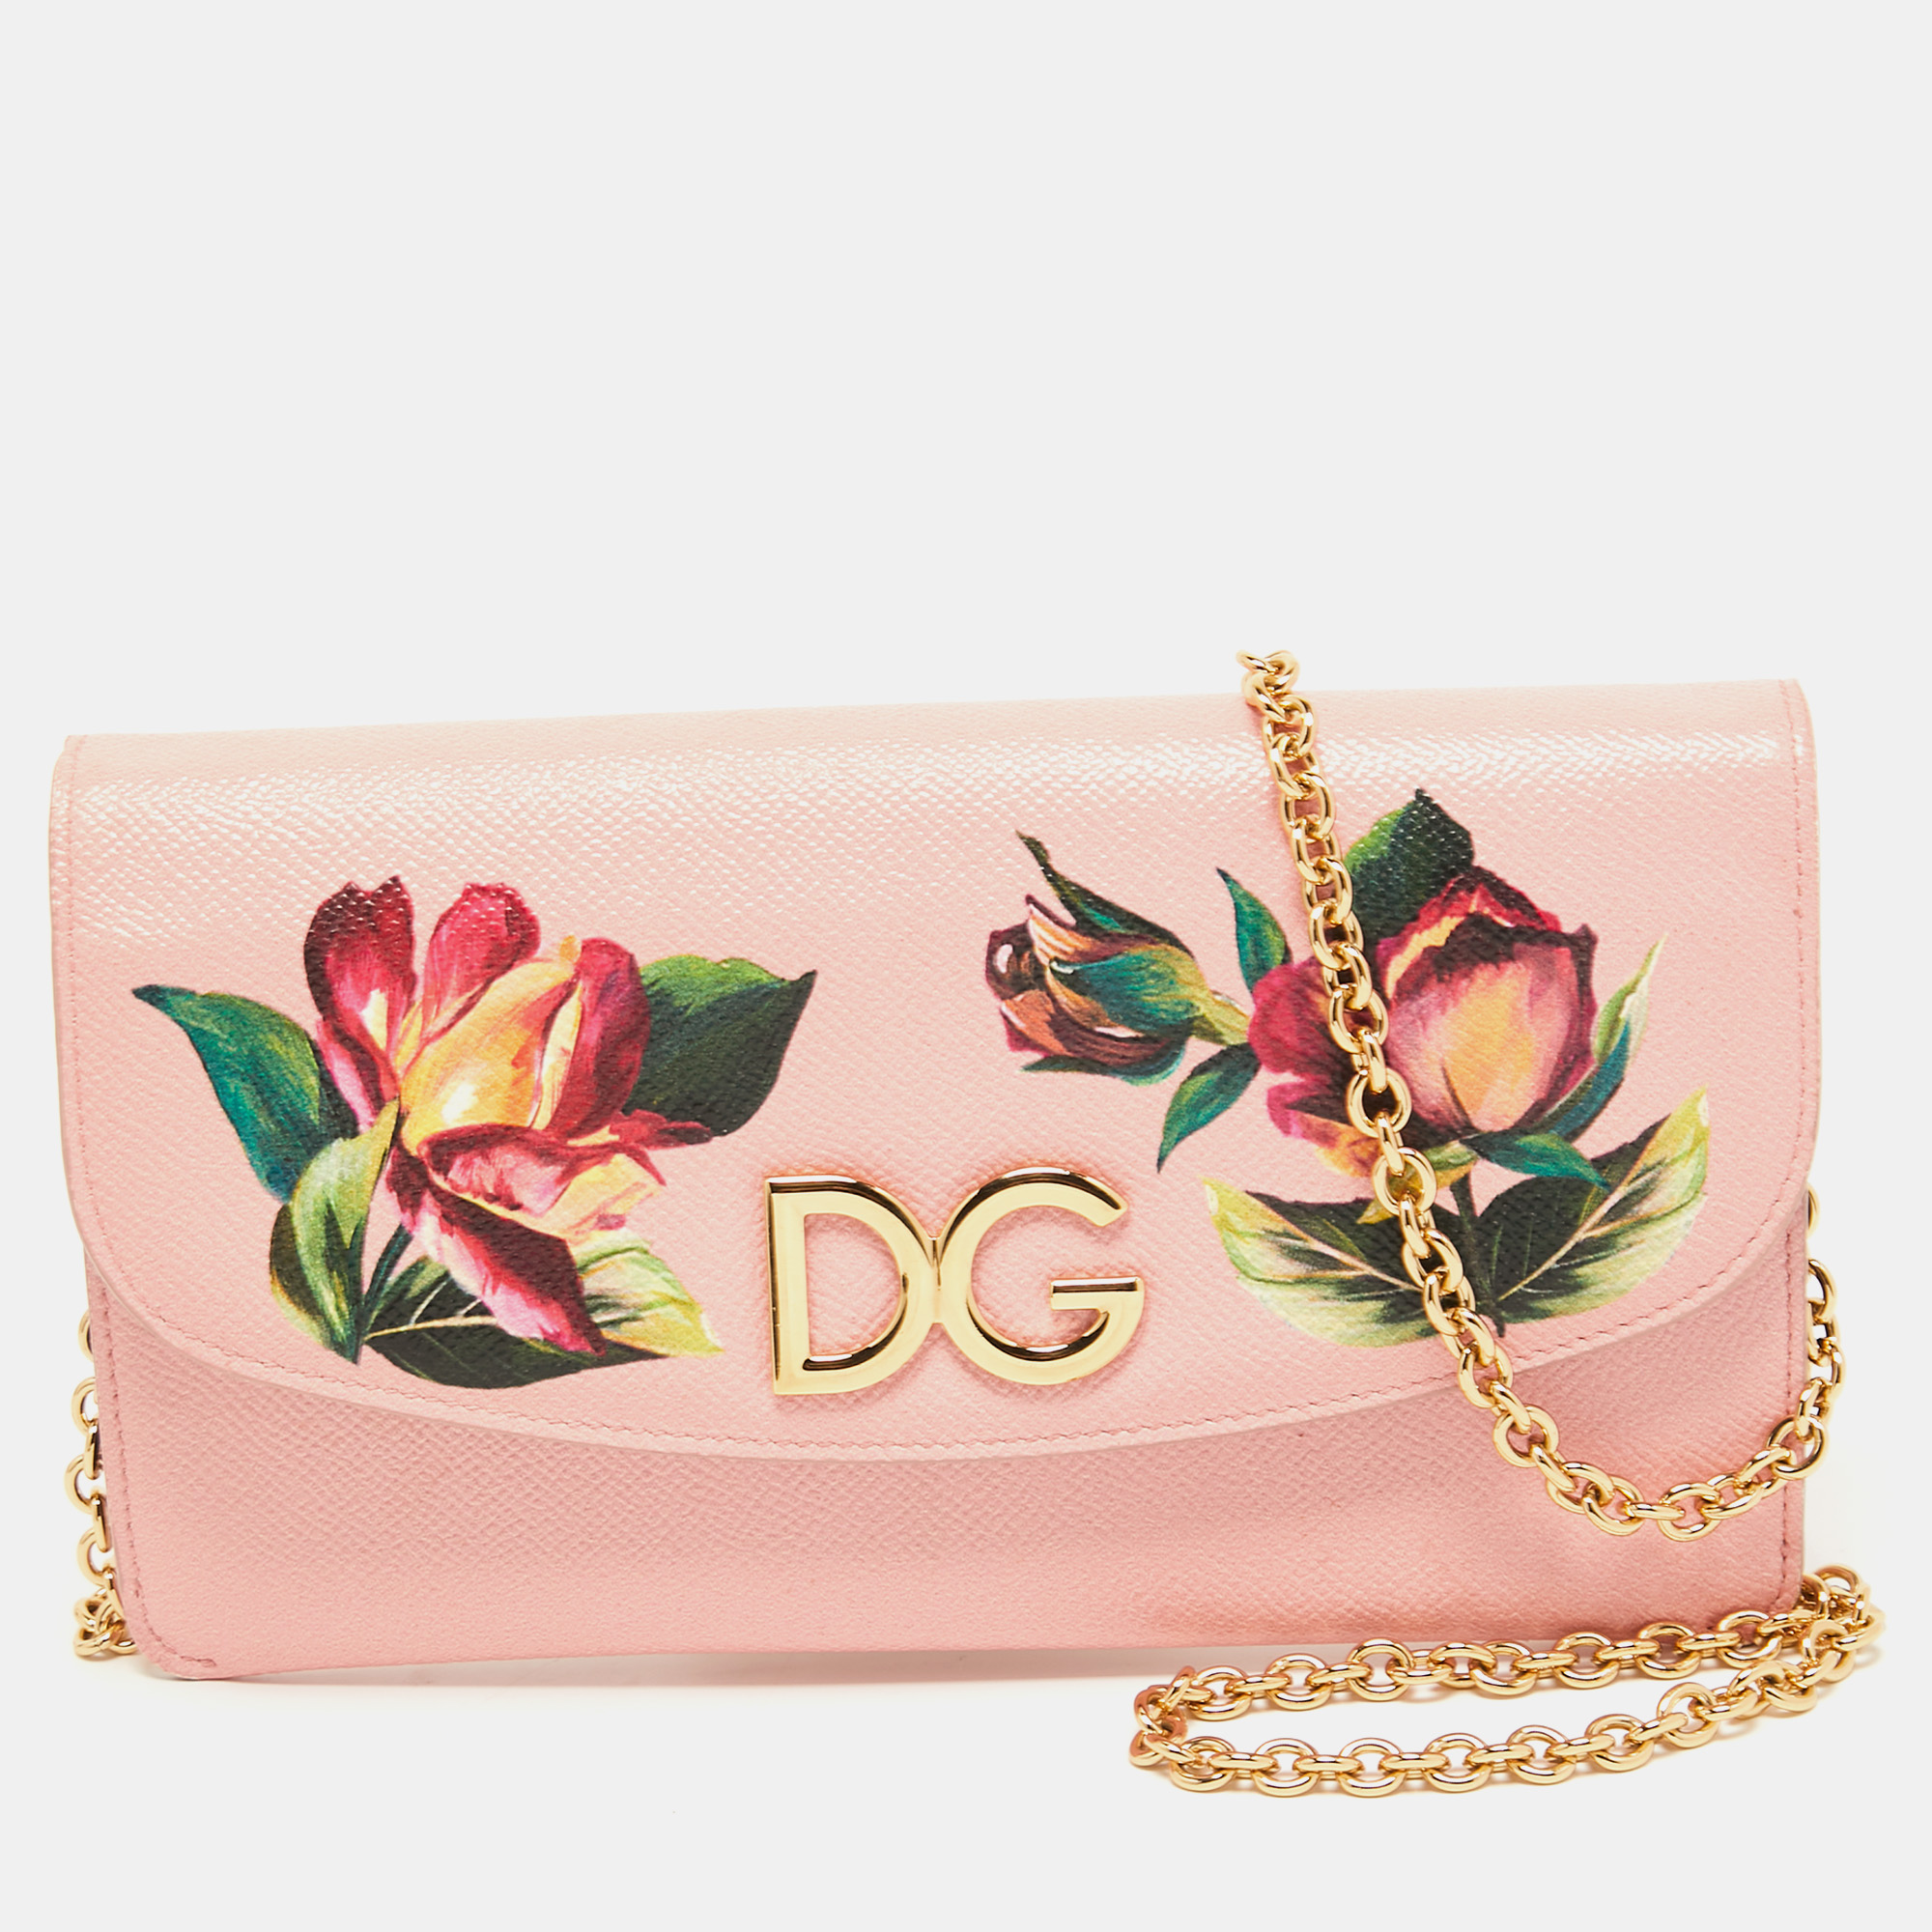 Pre-owned Dolce & Gabbana Pink Floral Print Leather Dg Logo Chain Clutch